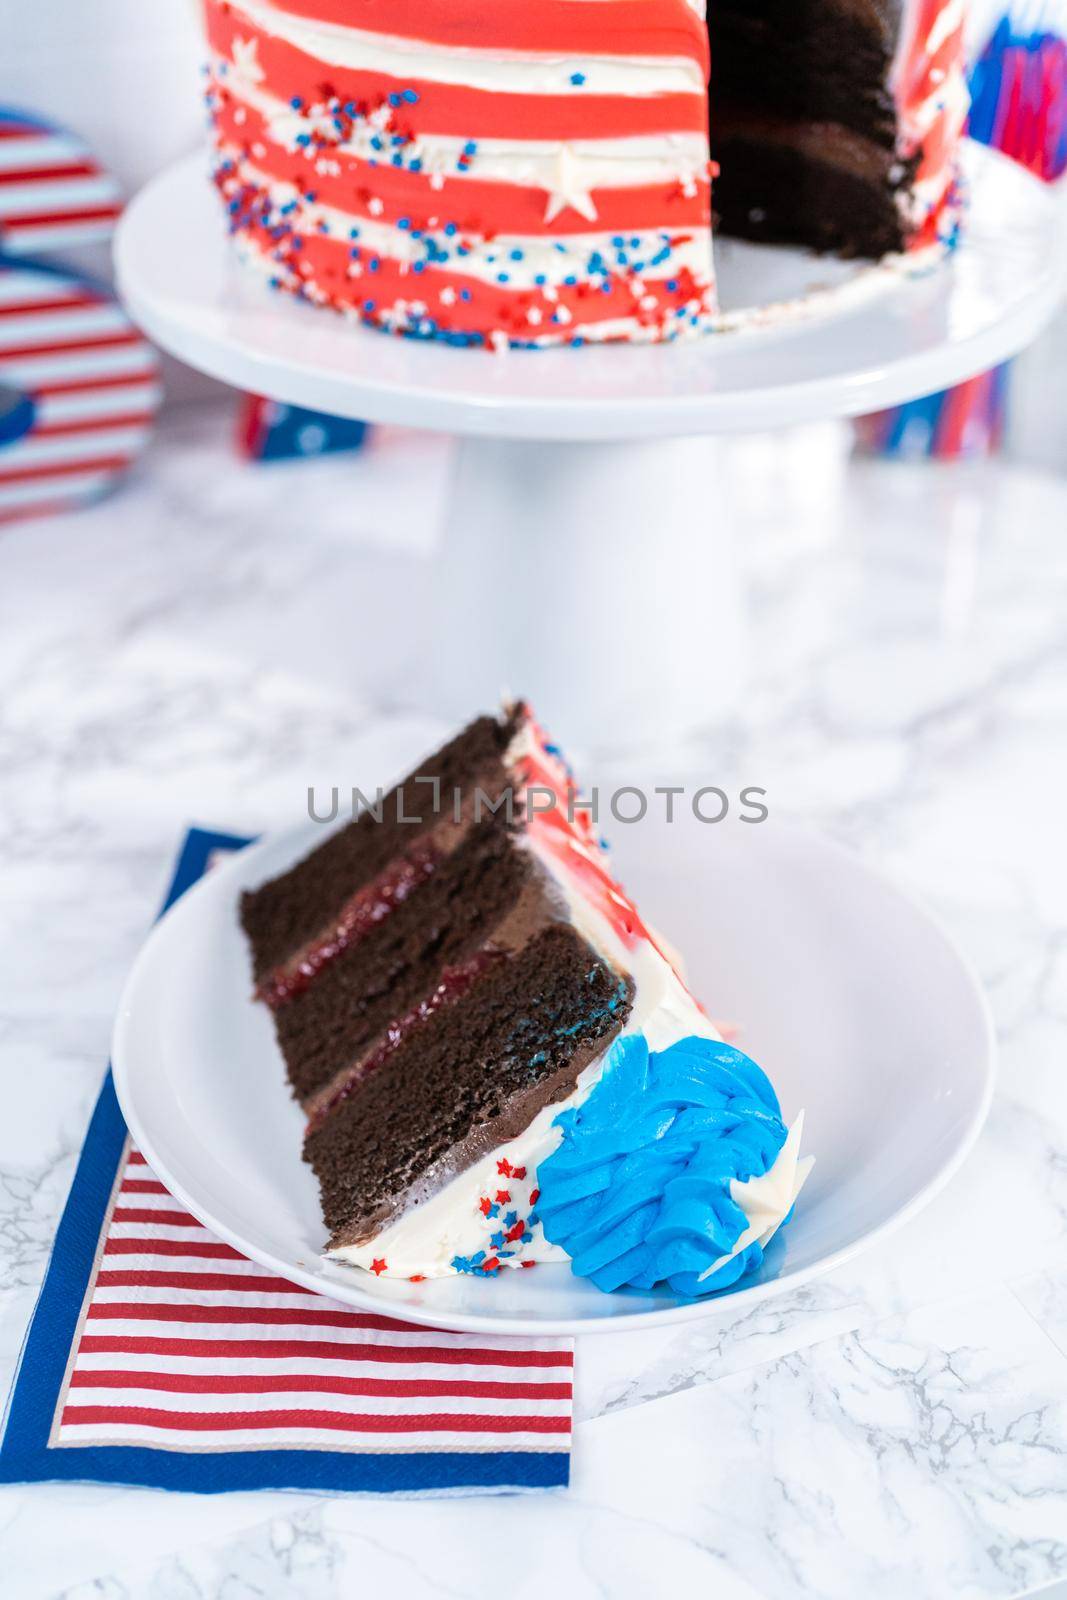 Slice of July 4th chocolate cake decorated with red, white, and blue buttercream frosting on a white plate.